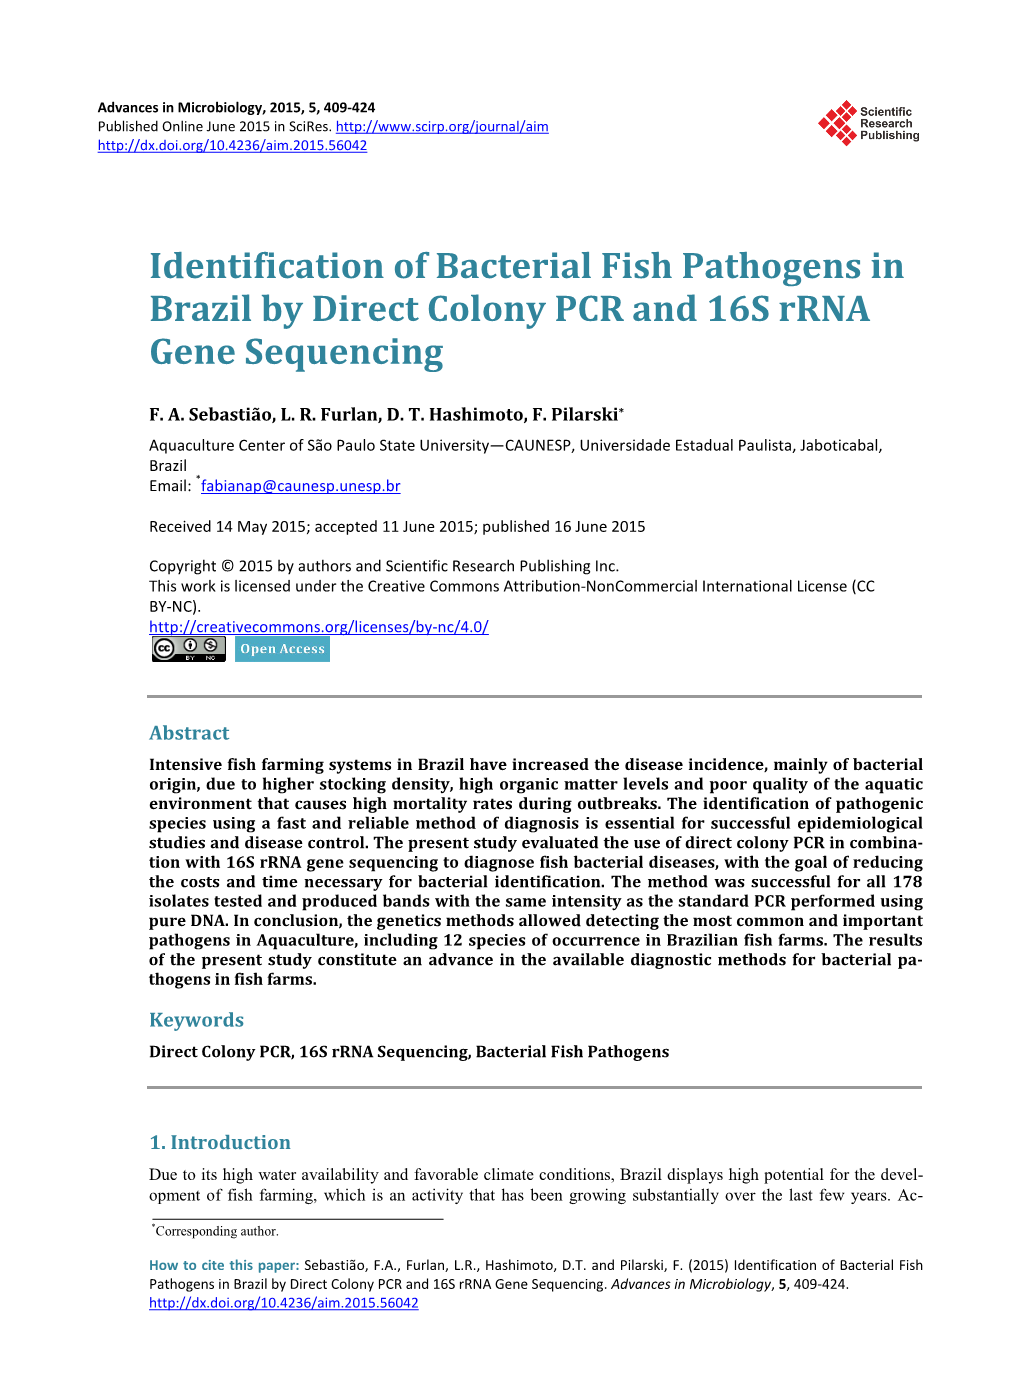 Identification of Bacterial Fish Pathogens in Brazil by Direct Colony PCR and 16S Rrna Gene Sequencing